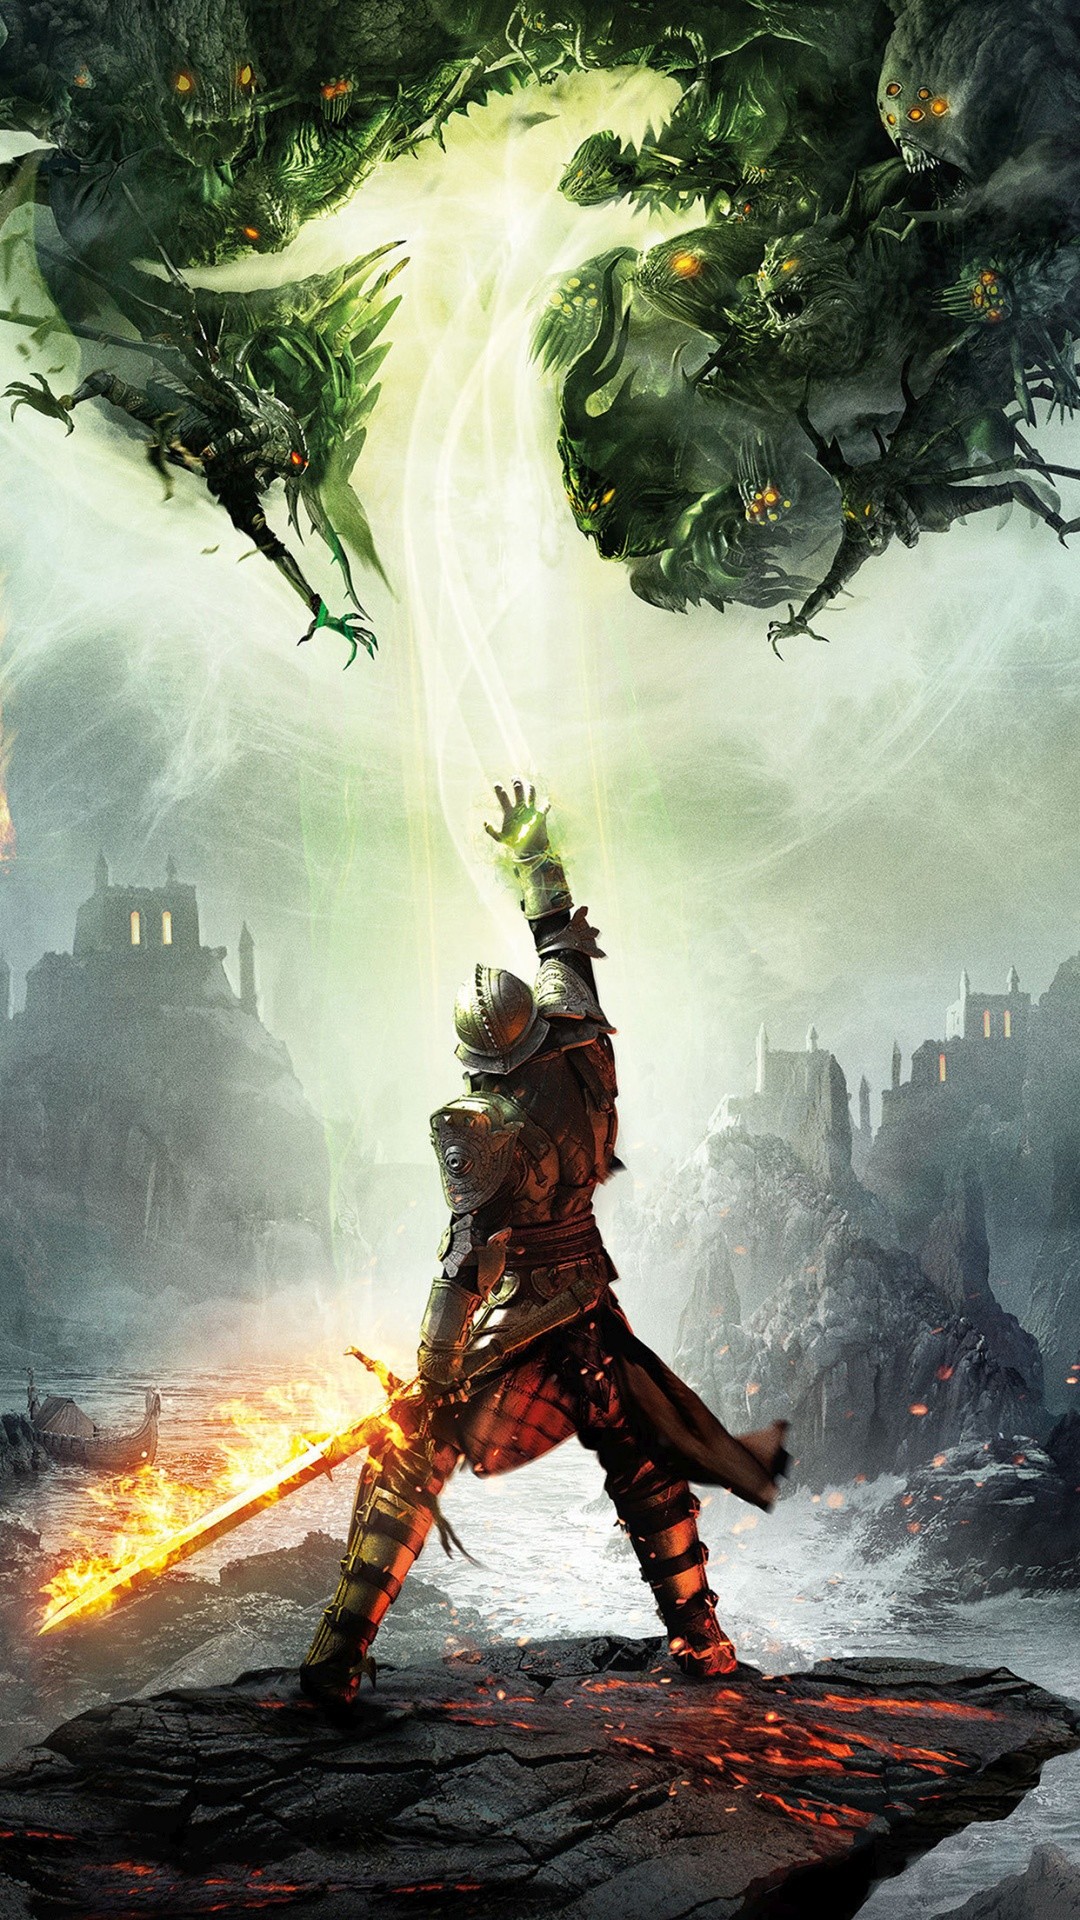 1080x1920 Dragon Age Game iPhone 6+ HD Wallpaper - http://freebestpicture.com